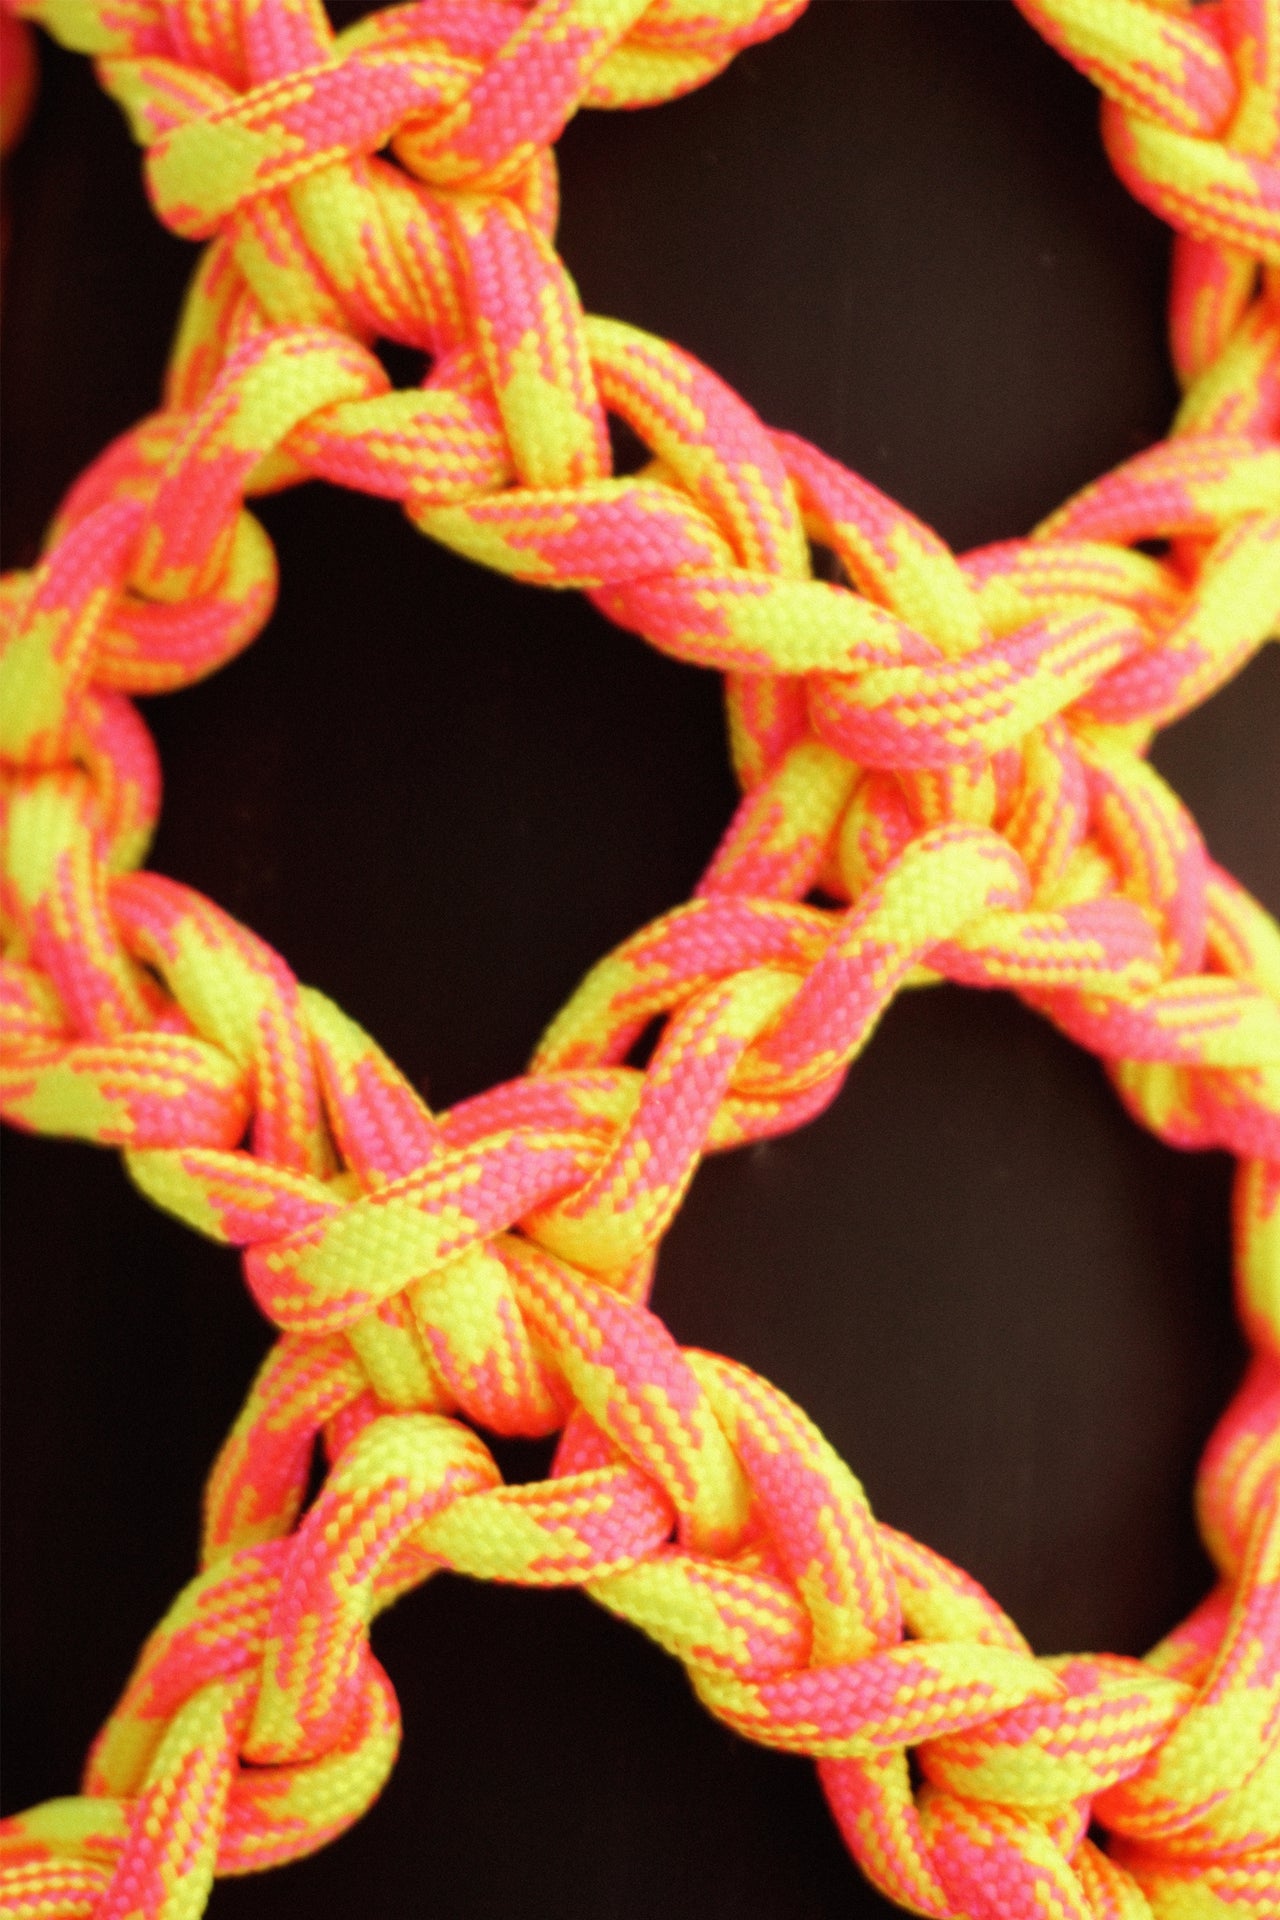 Yellow and pink water porter made of paracord rope